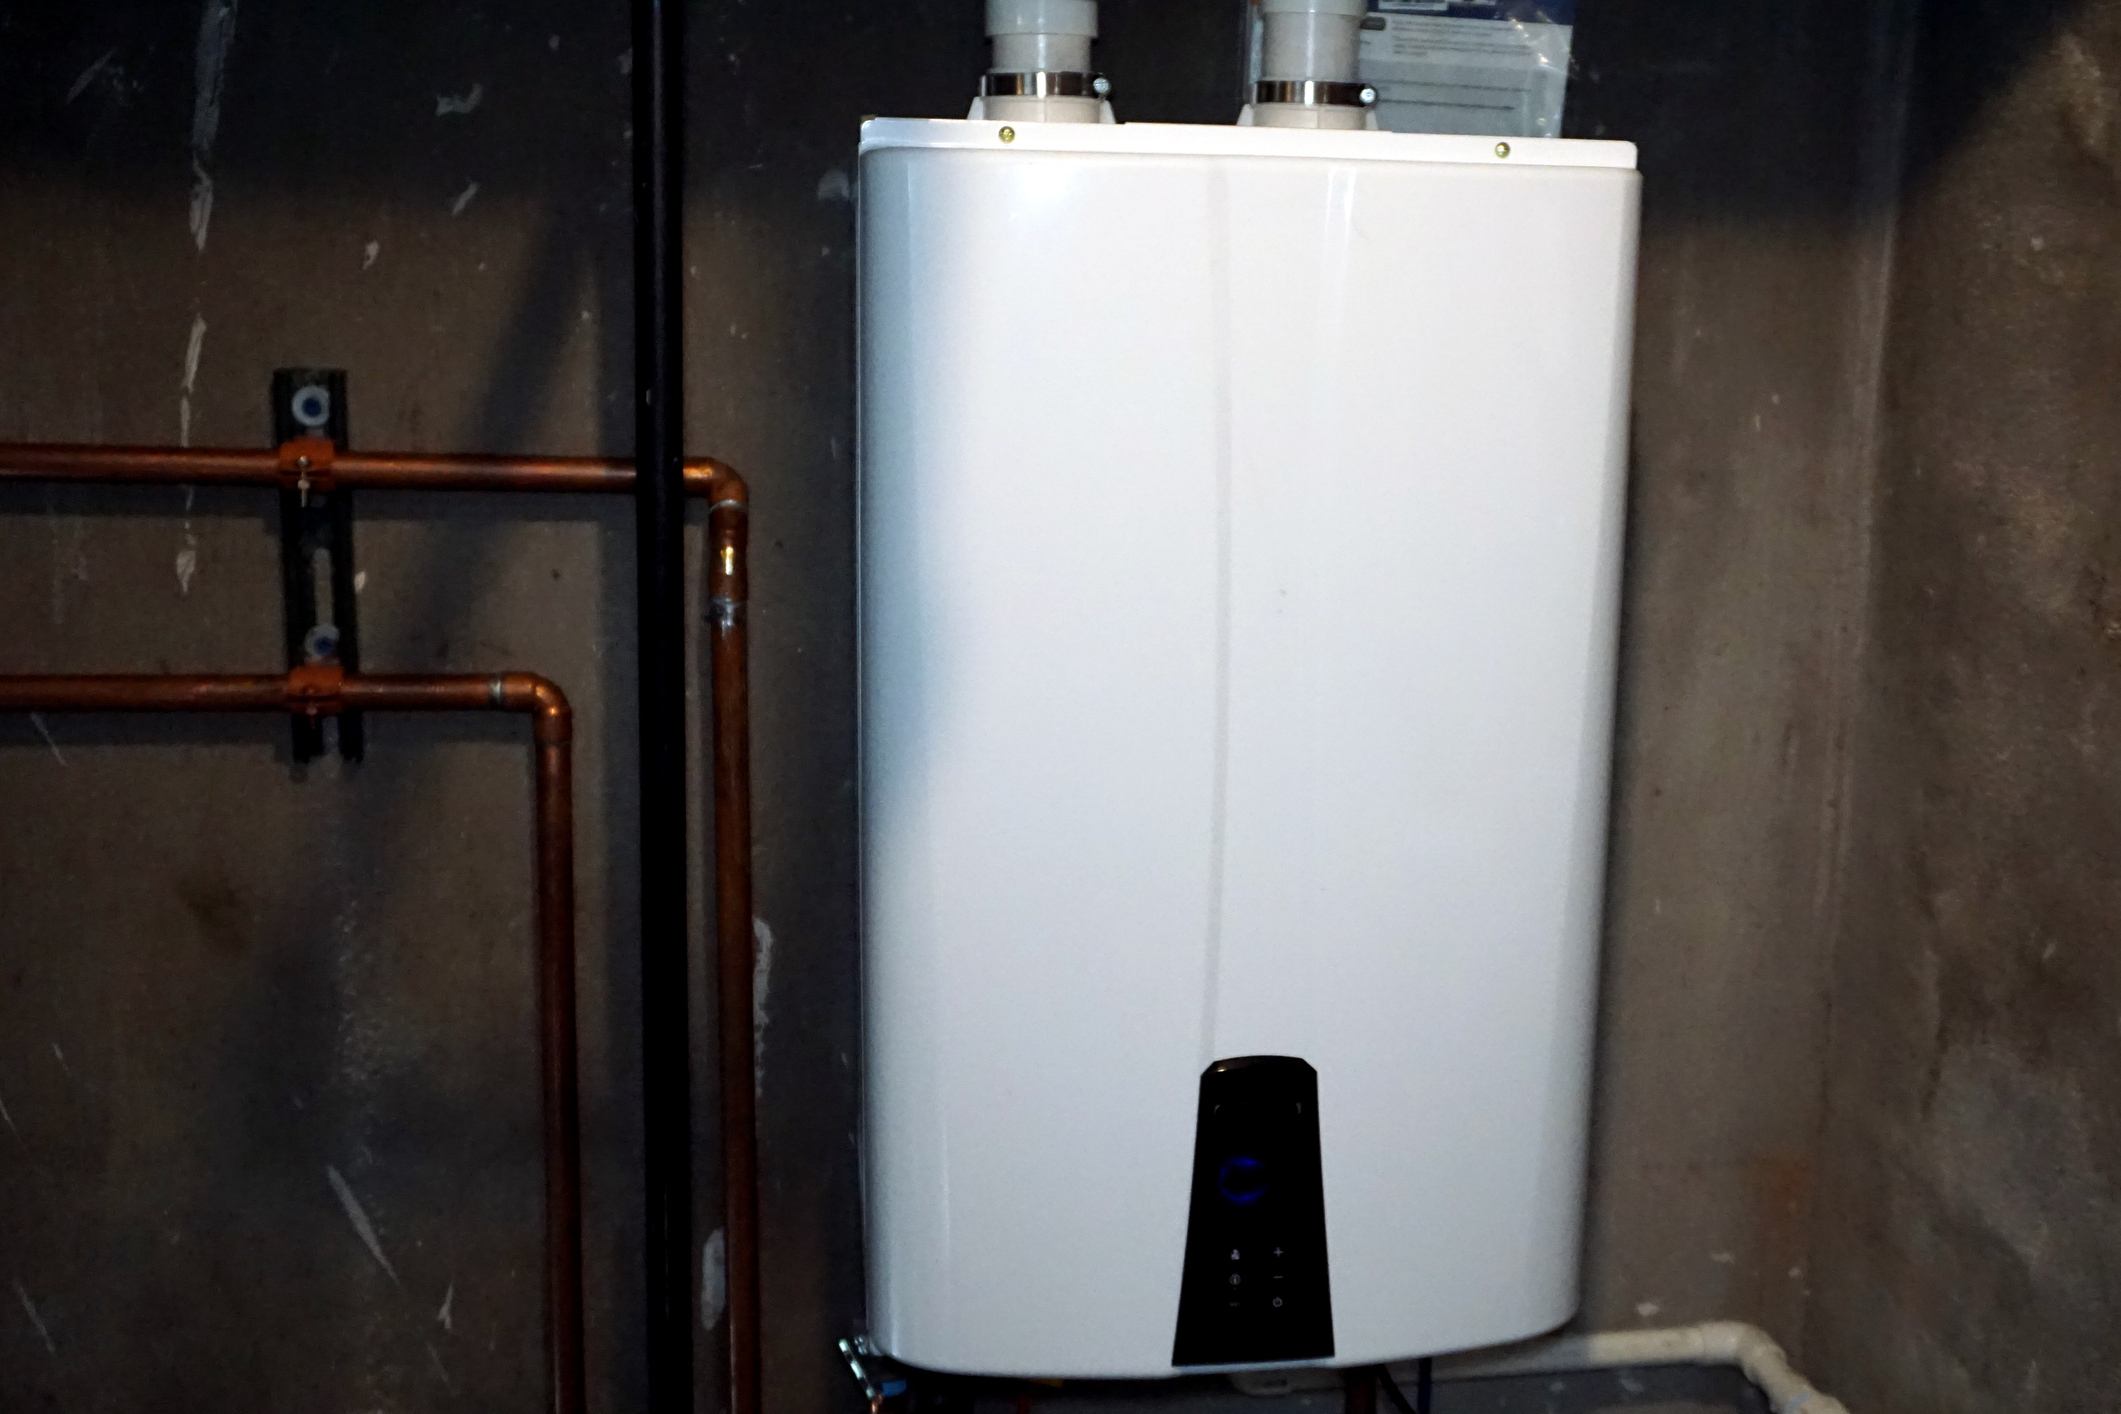 How Much Energy Can You Save by Switching to a Tankless Water Heater?